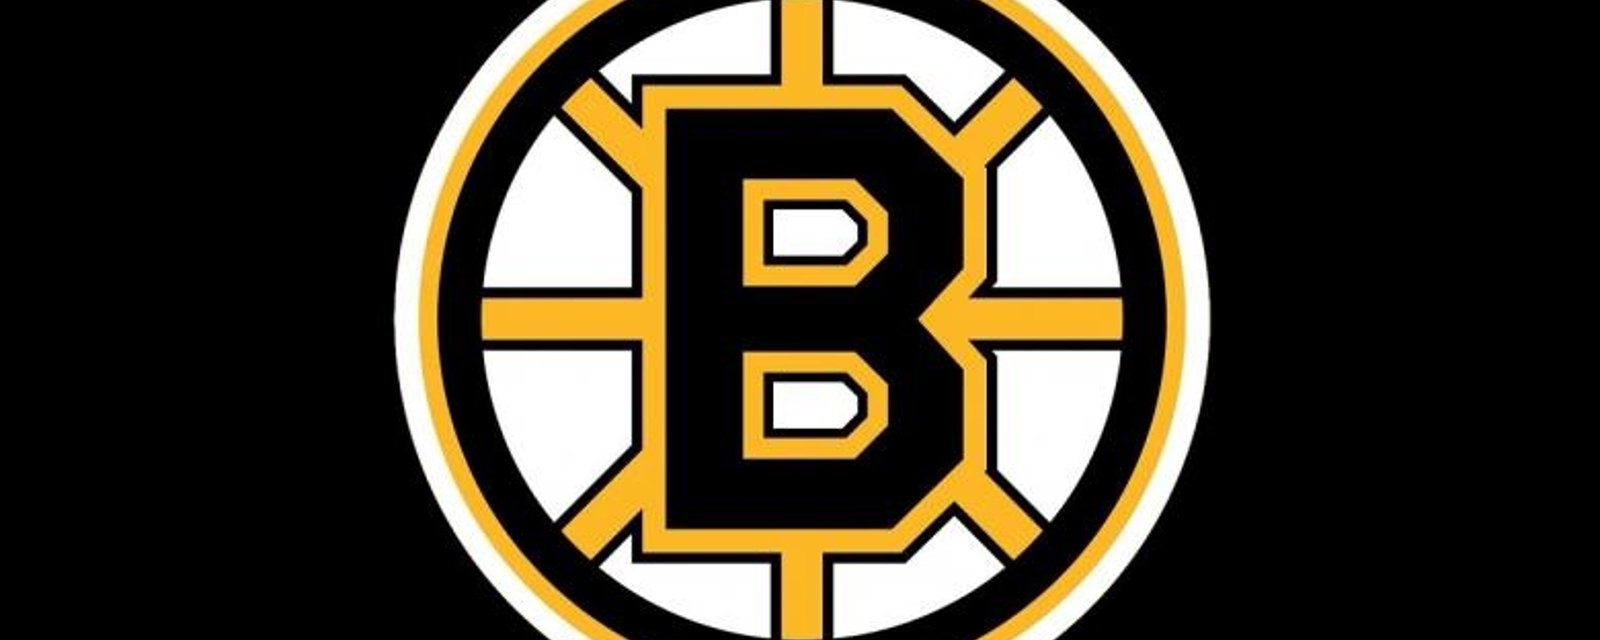 Breaking: Major fail from the Bruins at the trade deadline.